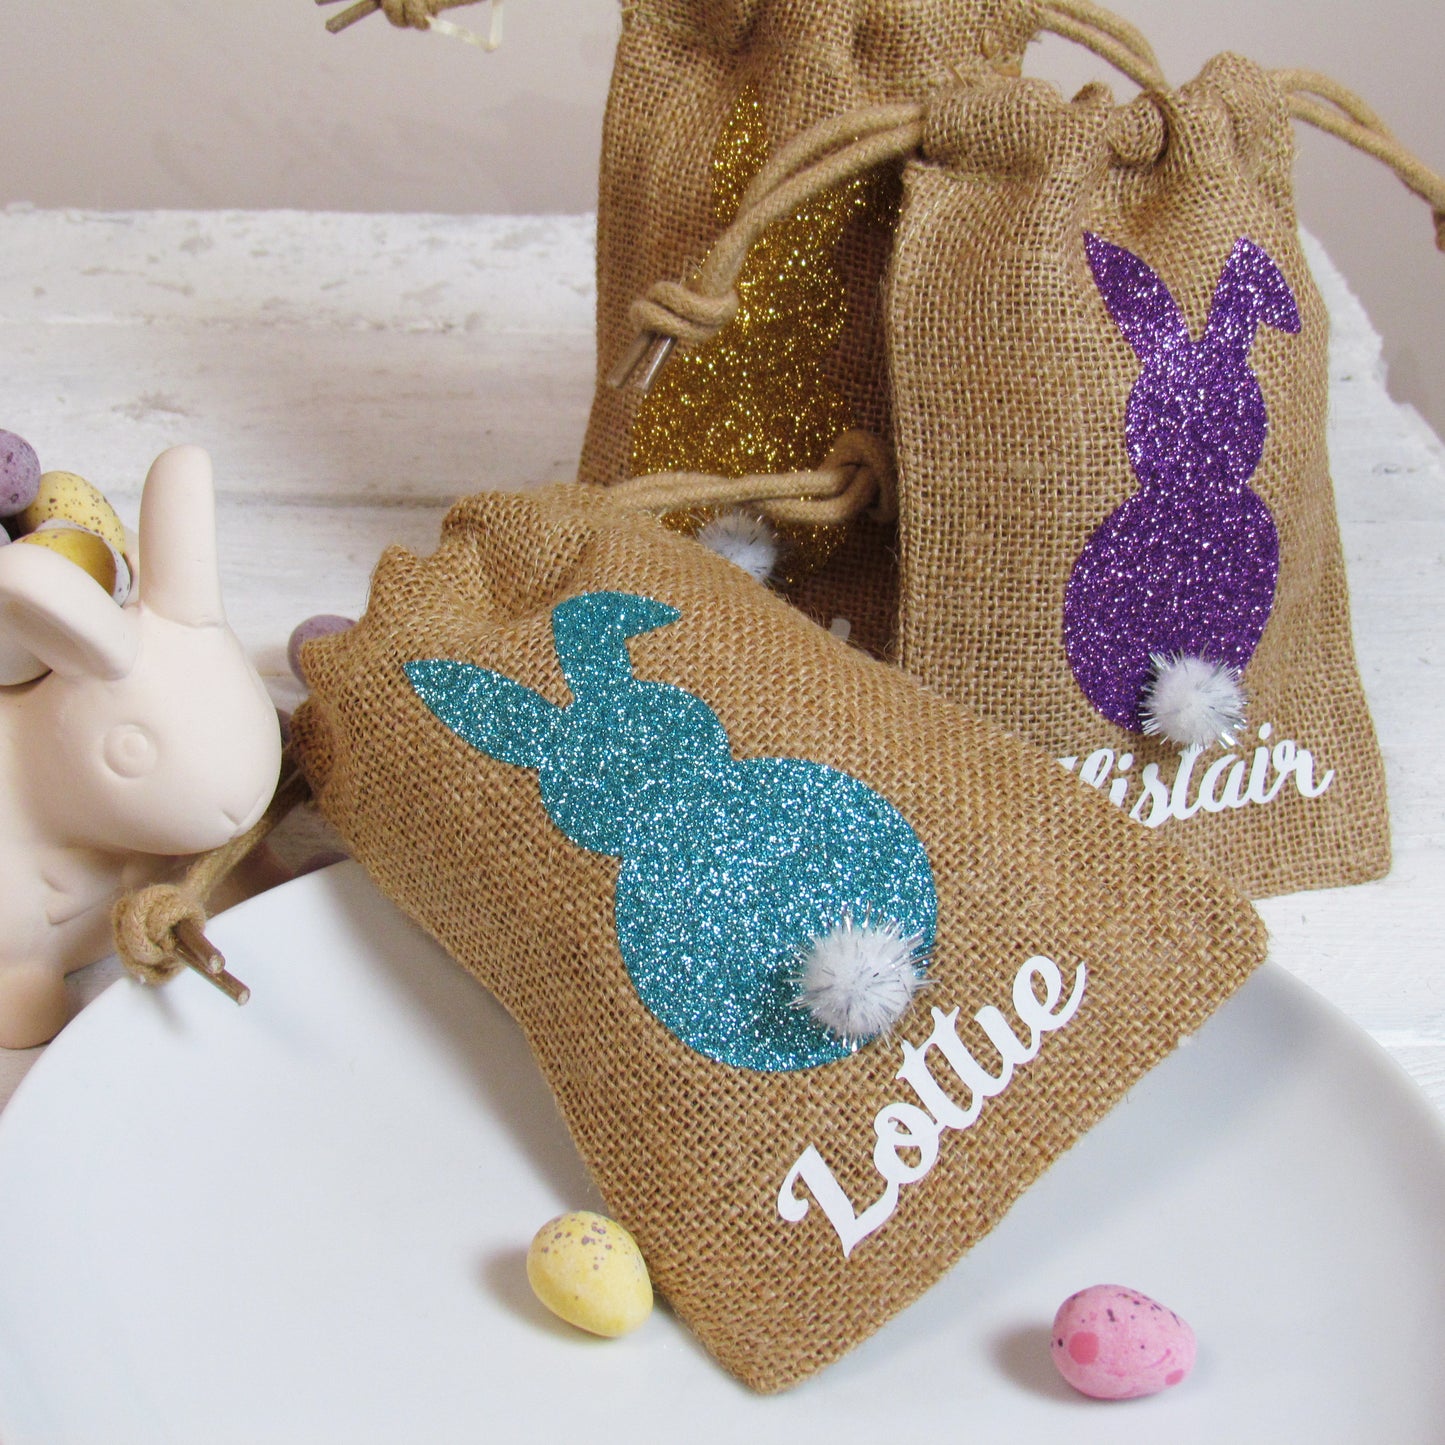 Personalised mini jute bags for Easter treats or place settings